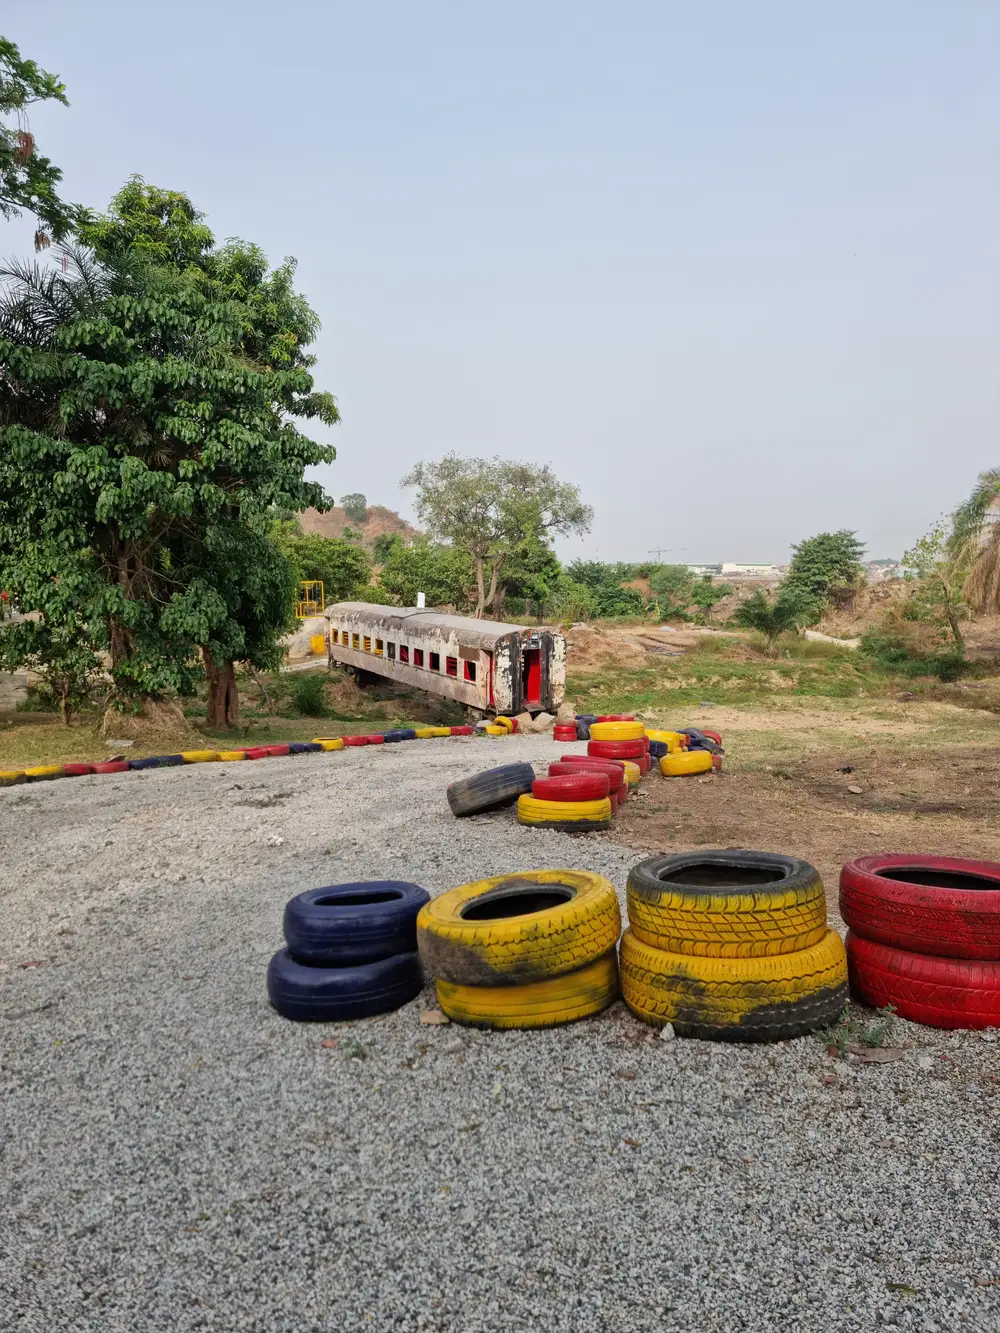 Colored tyres